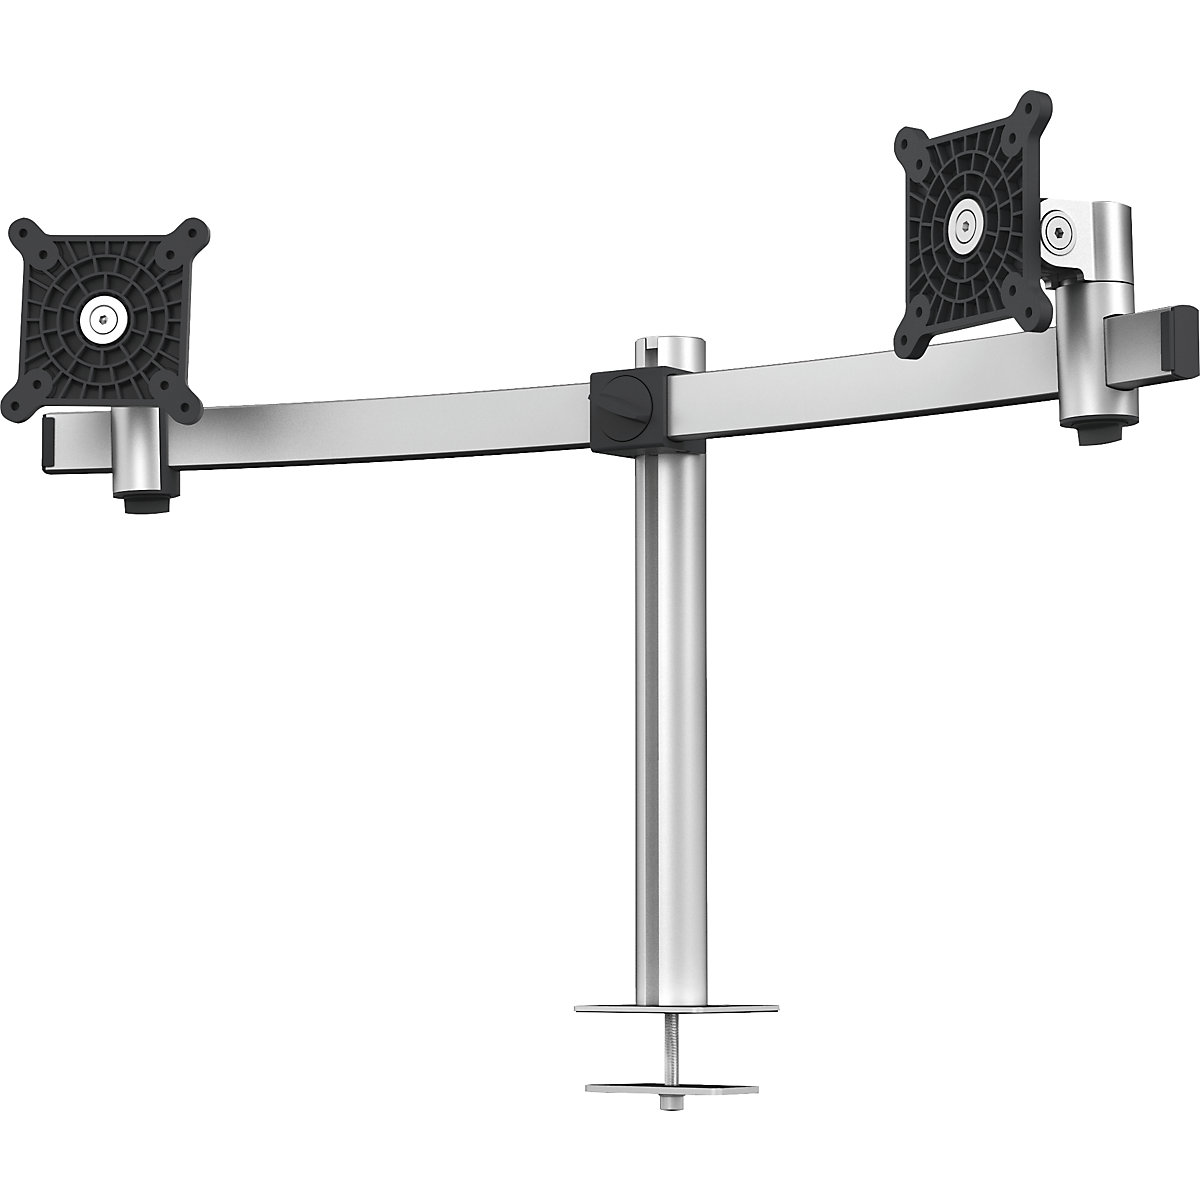 DURABLE – Monitor holder for 2 monitors, HxWxD 445 x 780 x 190 mm, through-desk mounting